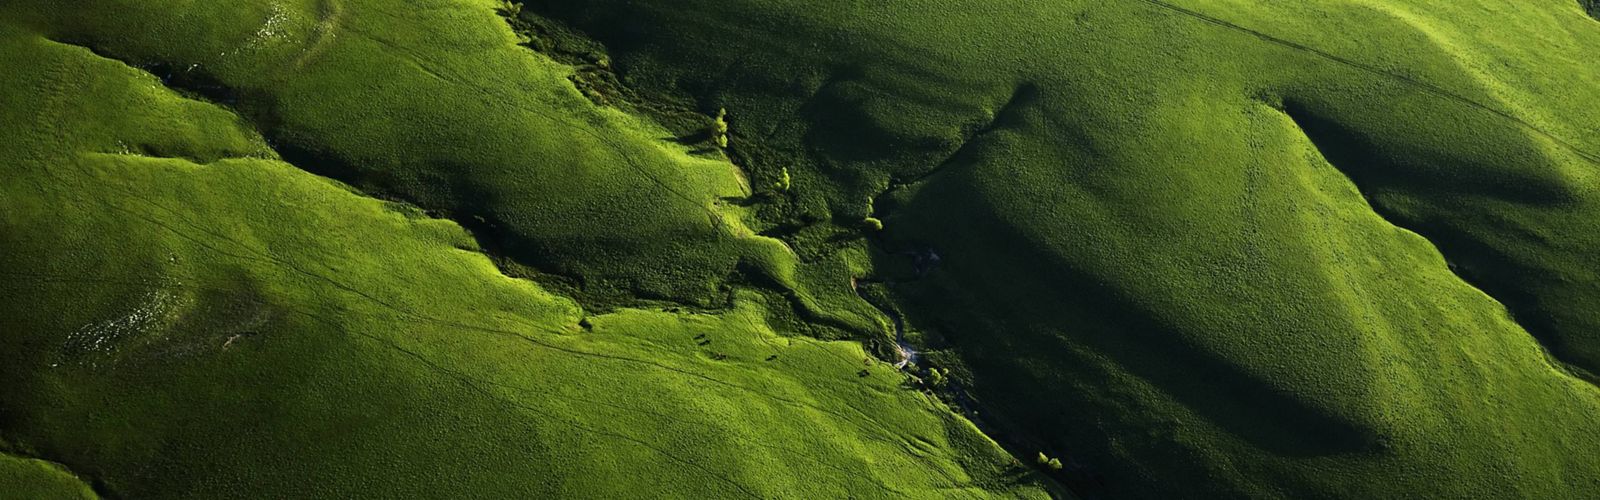 Aerial view of green grass covered hills in the spring.